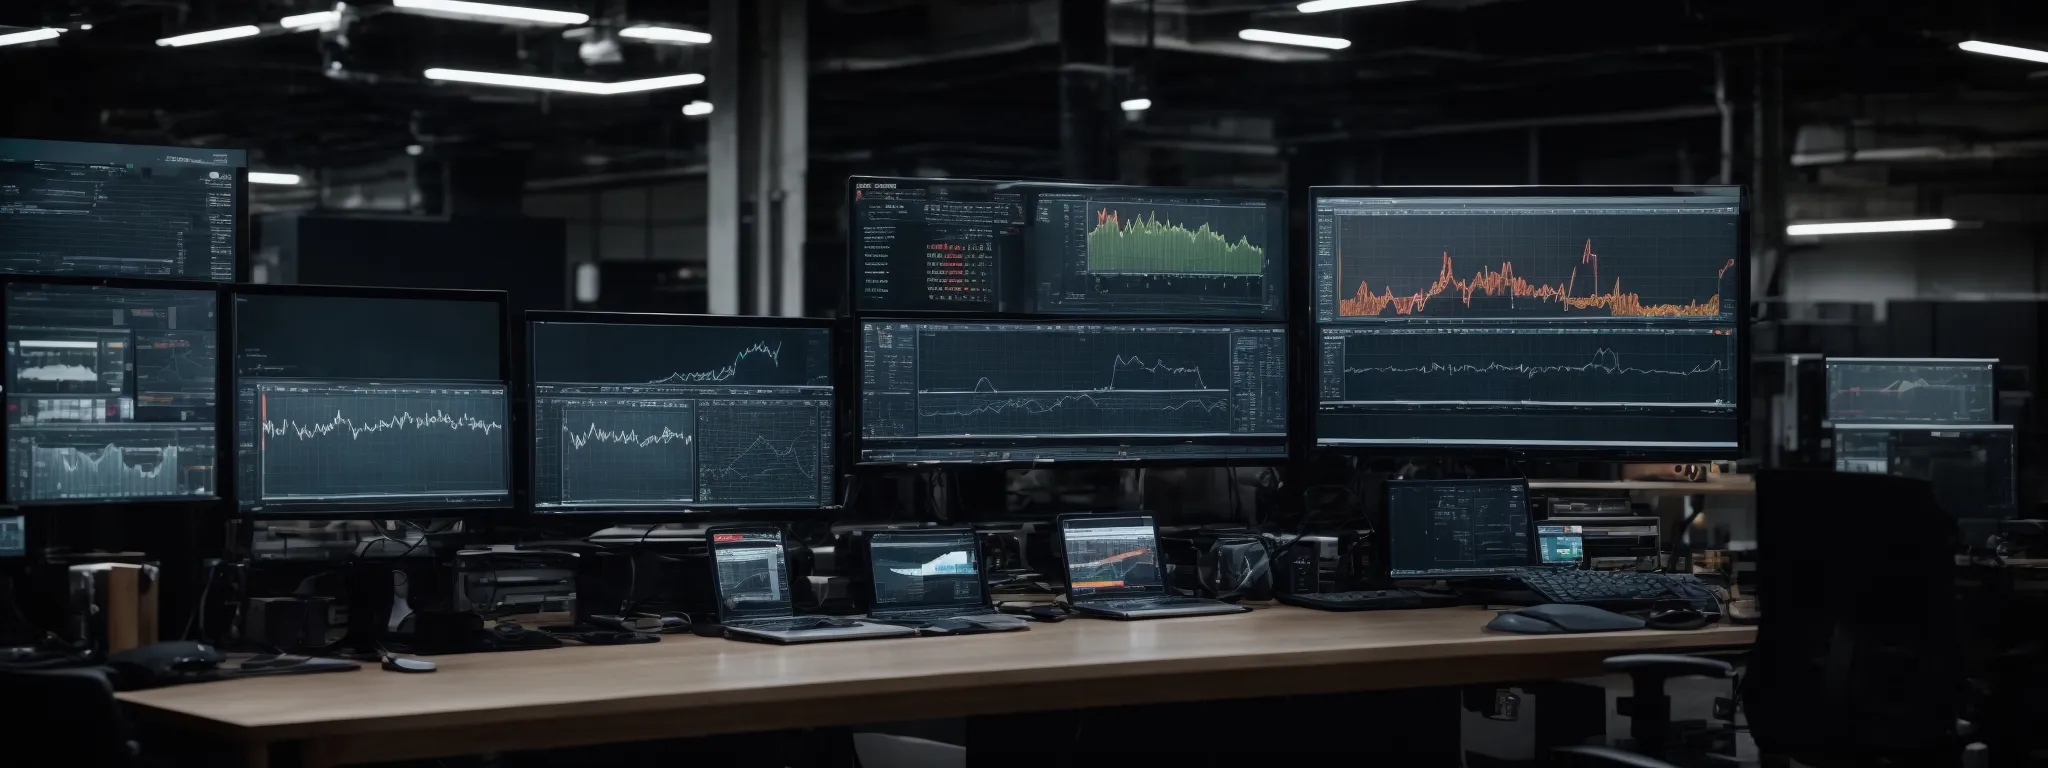 a modern industrial workspace with computer monitors displaying complex graphs and analytics dashboards.